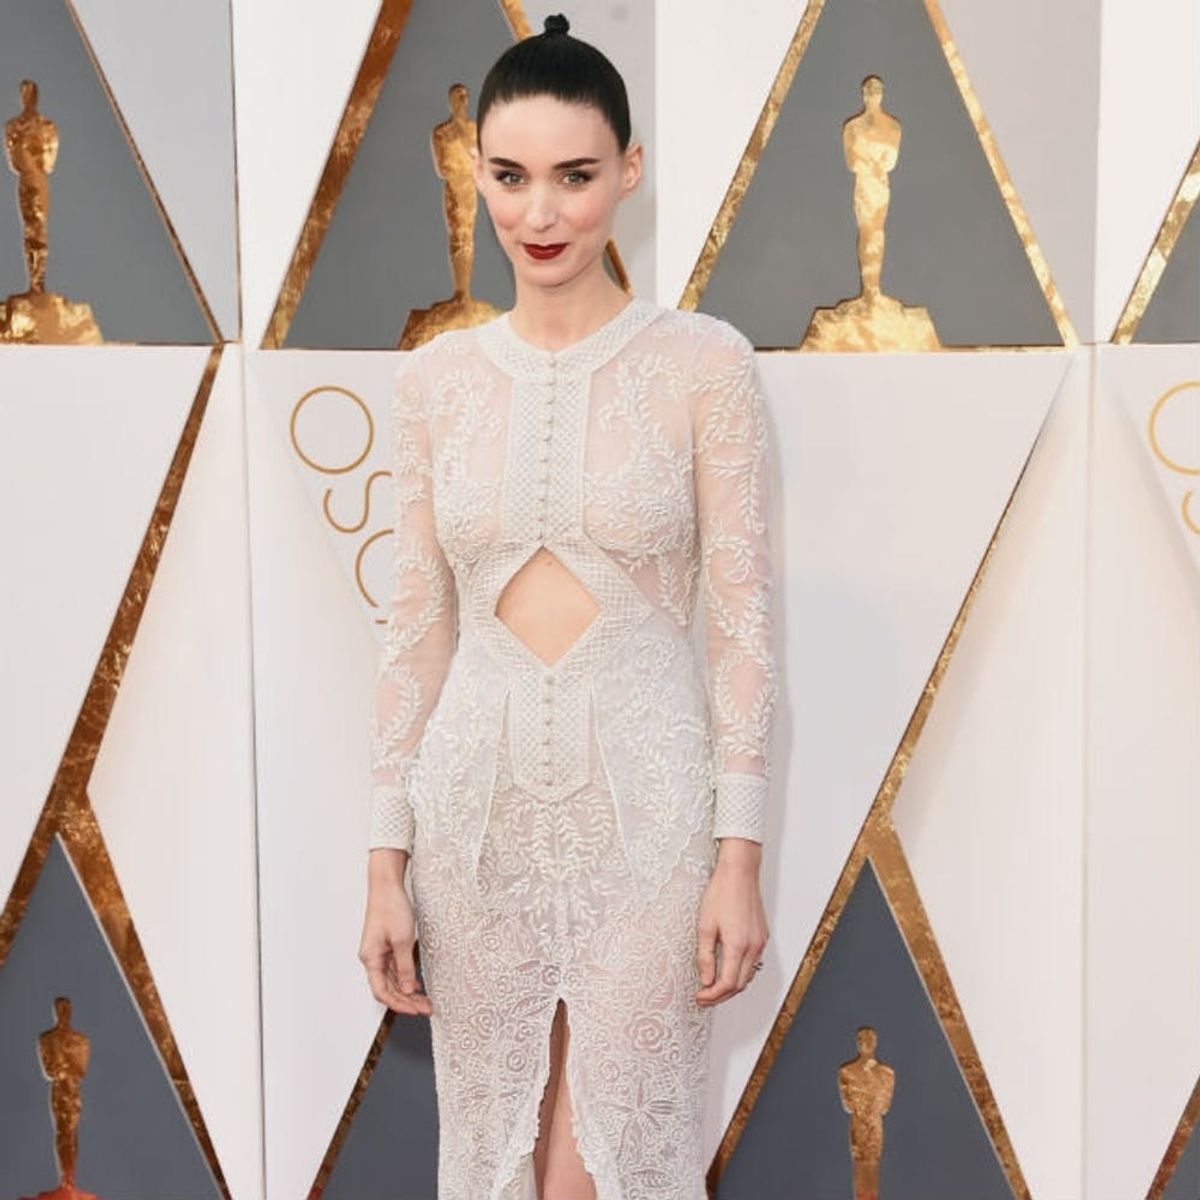 This Oscars Dress Features THE Cutout You’ve Never Seen Before